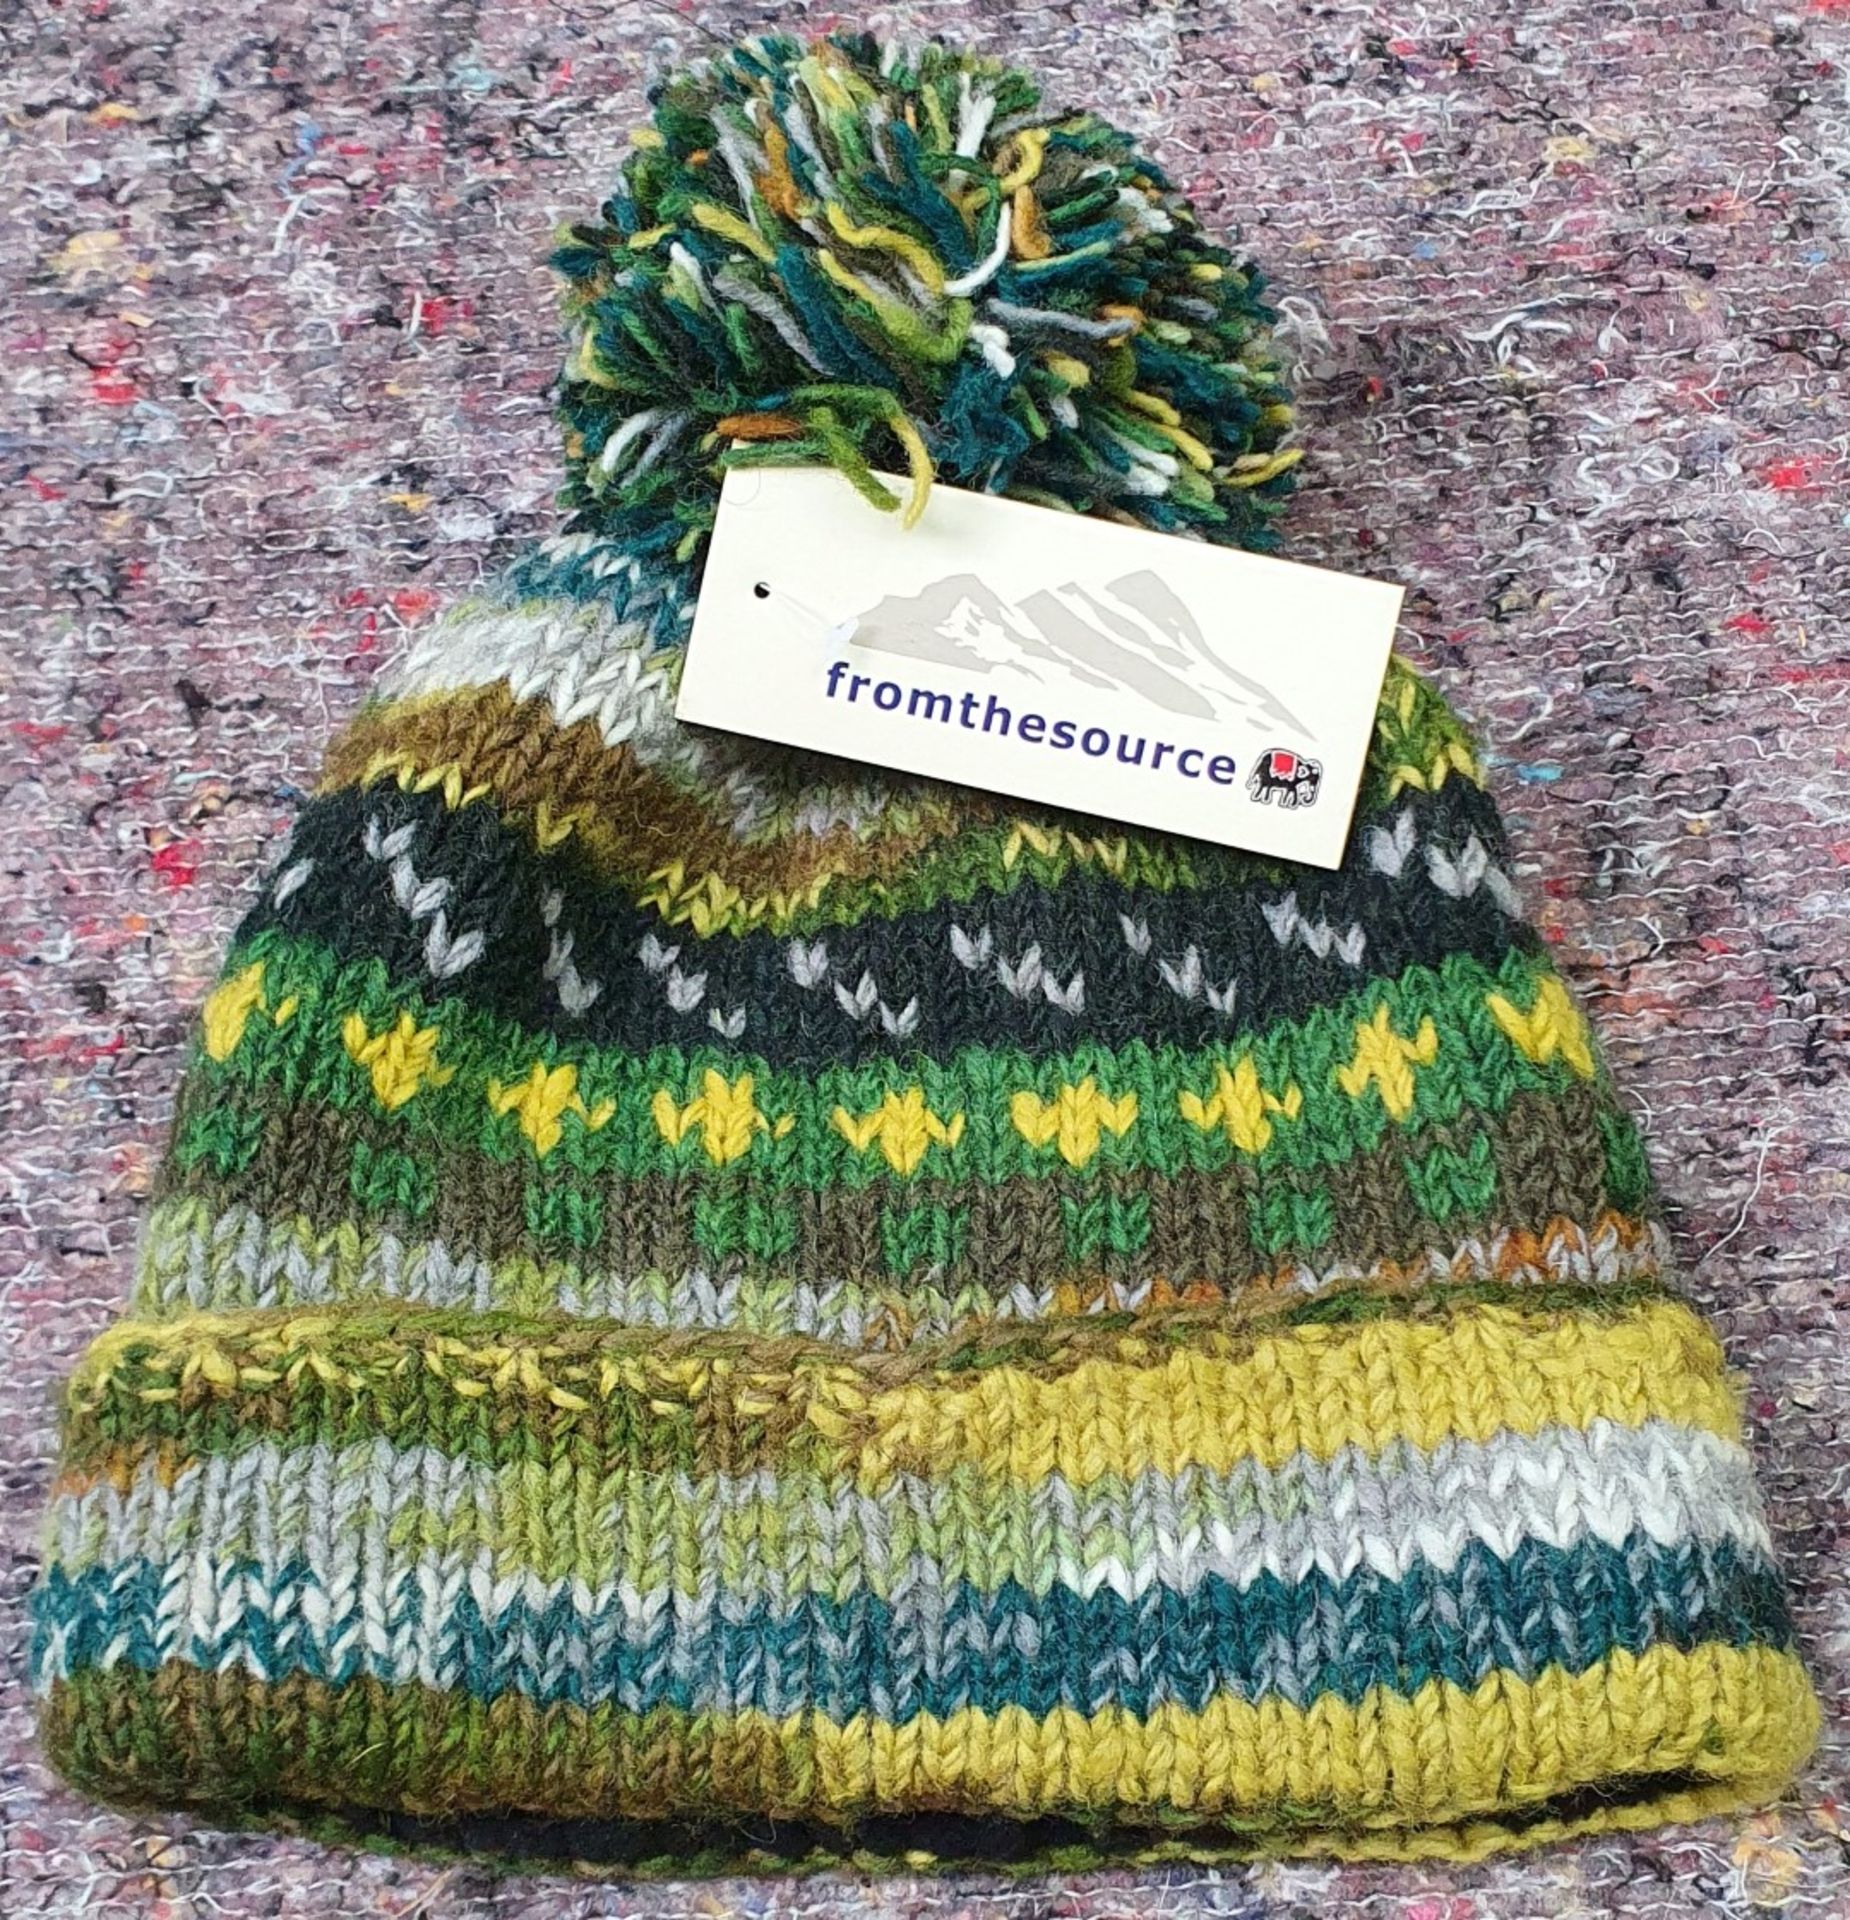 3 x Woolly Bobble Hats by From The Source - New Stock - RRP £49 - Ref: TCH237 - CL840 - Location: - Image 7 of 8